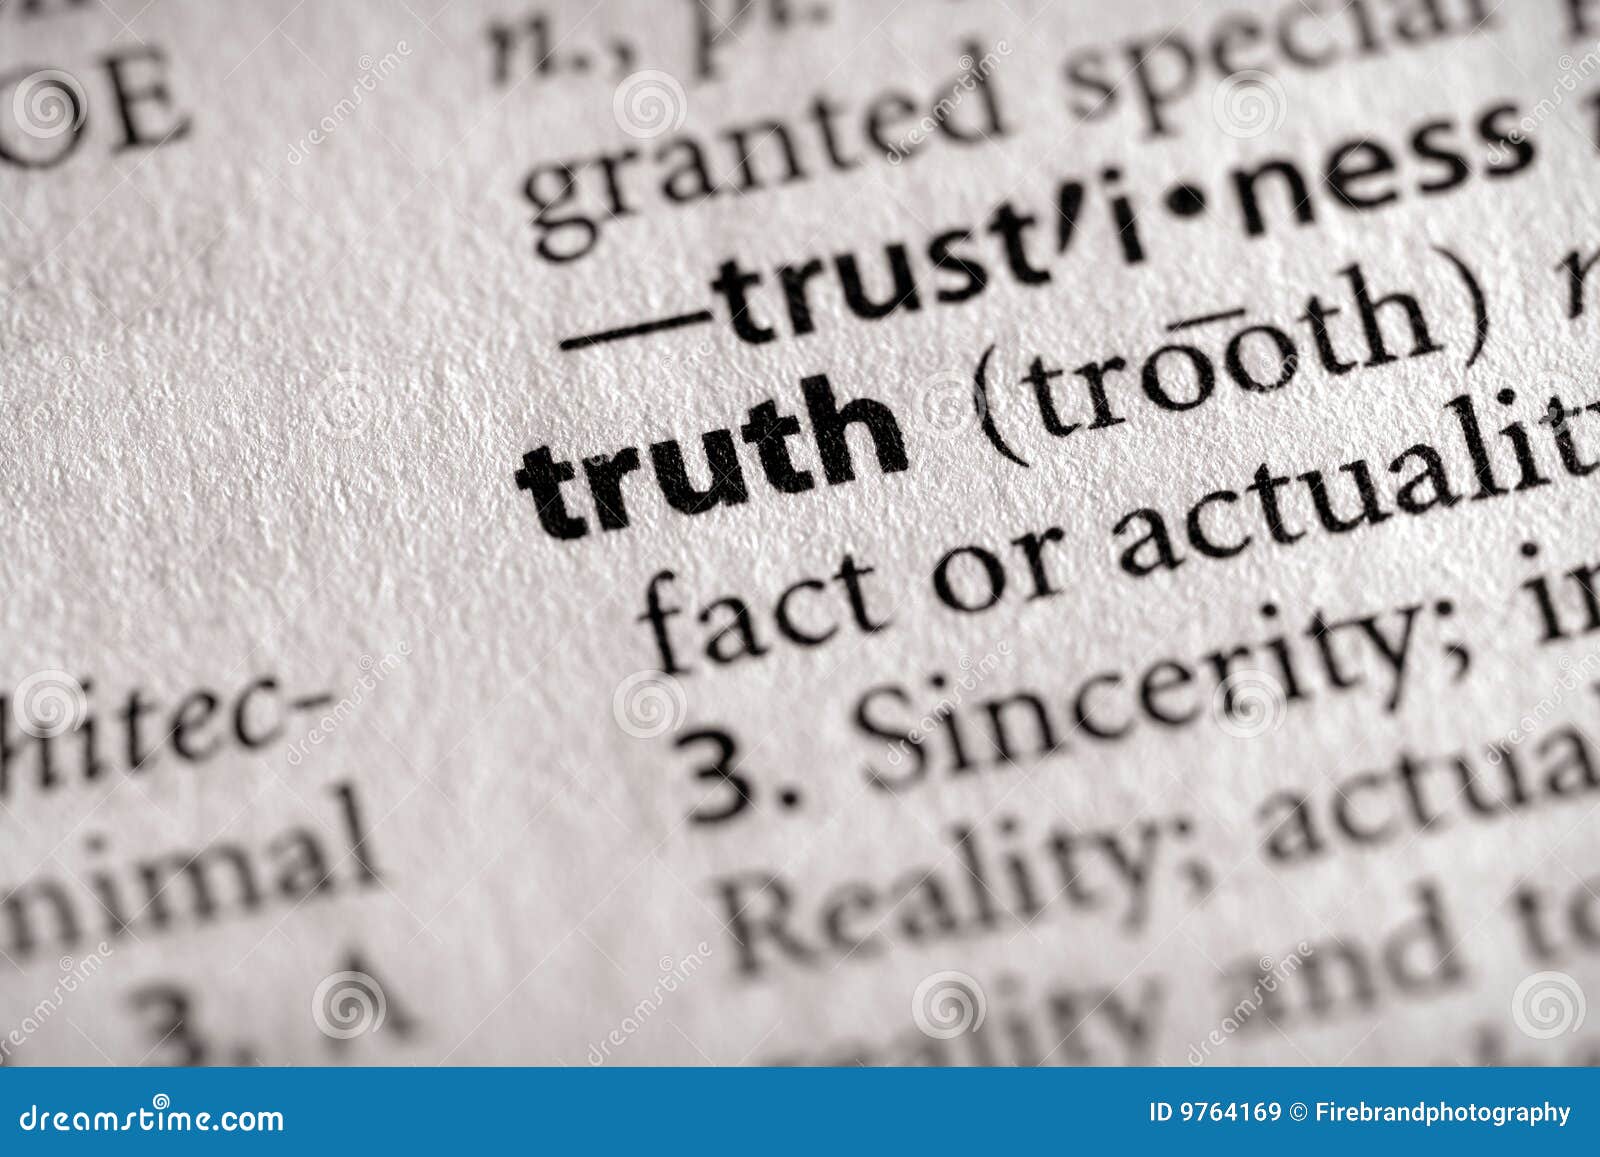 dictionary series - philosophy: truth